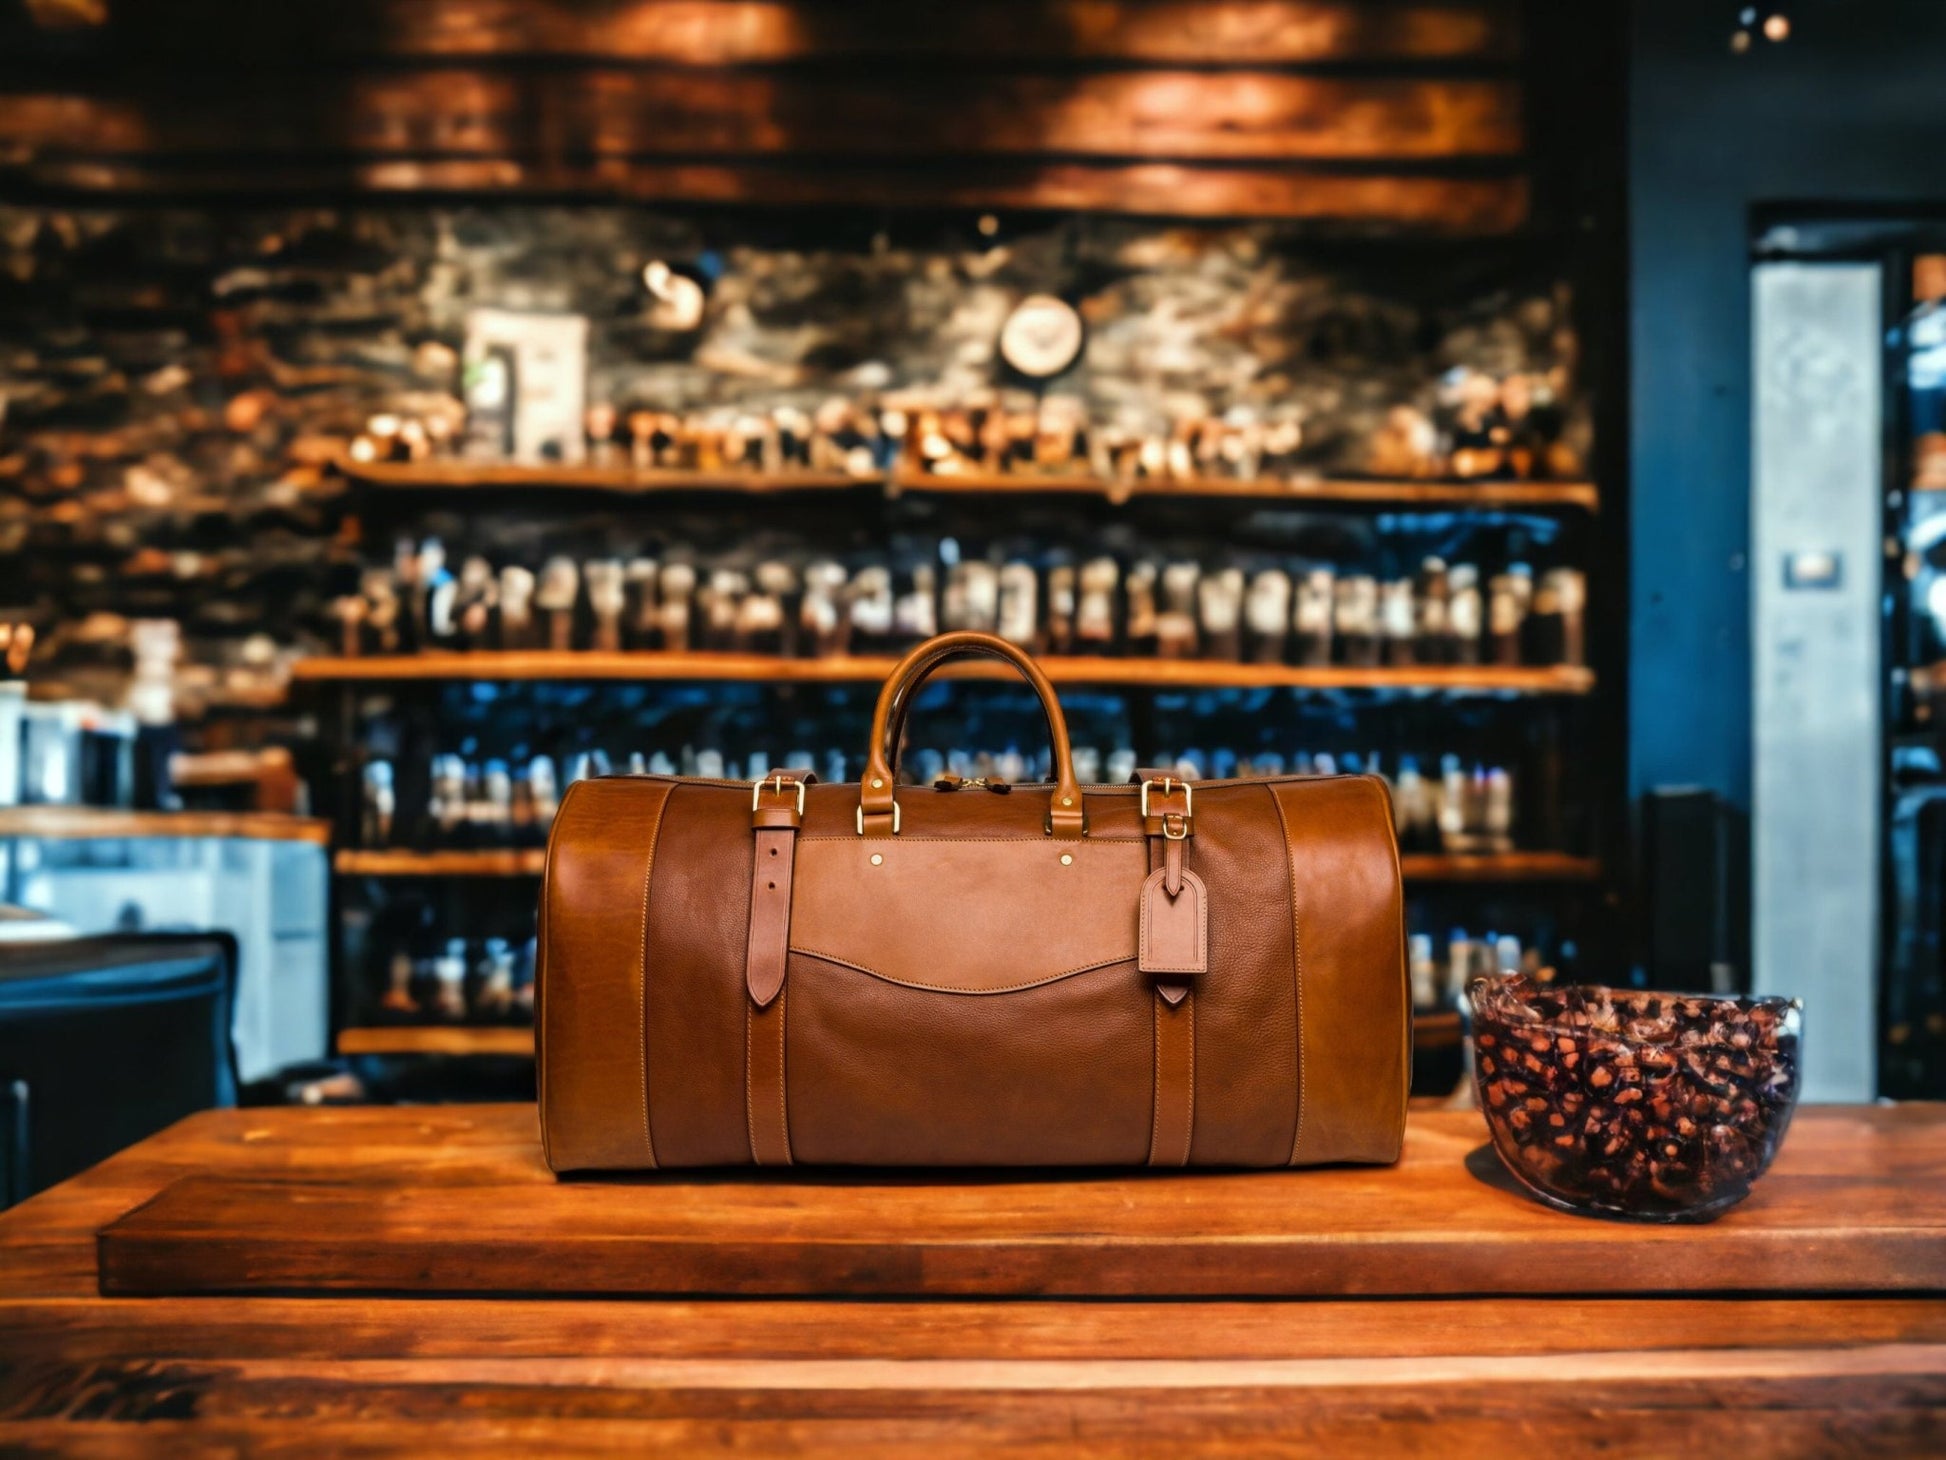 Brown | Large Men's Leather Duffle Bag | Travel Holdall | Luggage | Carry All Holdall |  Leather Luggage | Carry on Baggage  | Suitcase  99percenthandmade   